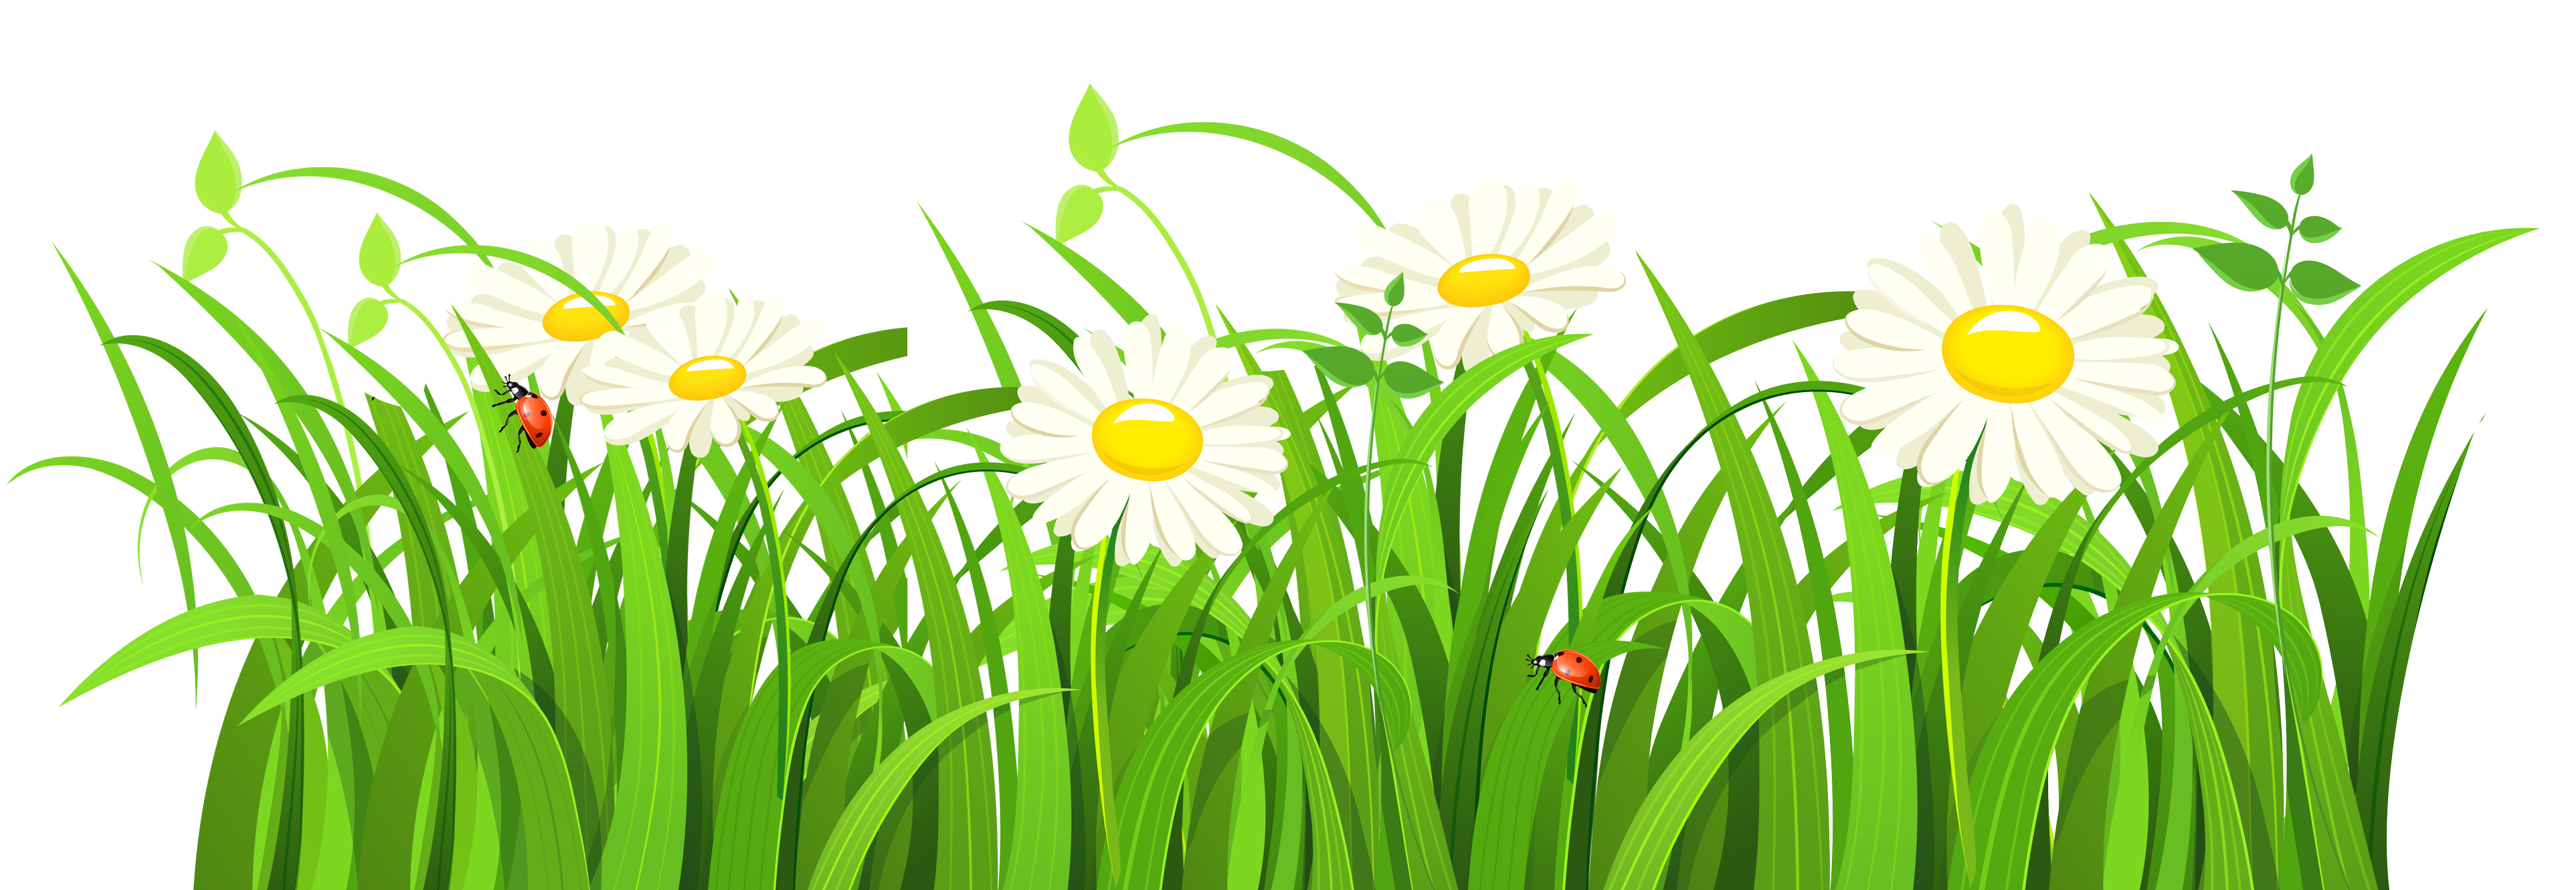 Download PNG image - Natural Grass Vector PNG Clipart 